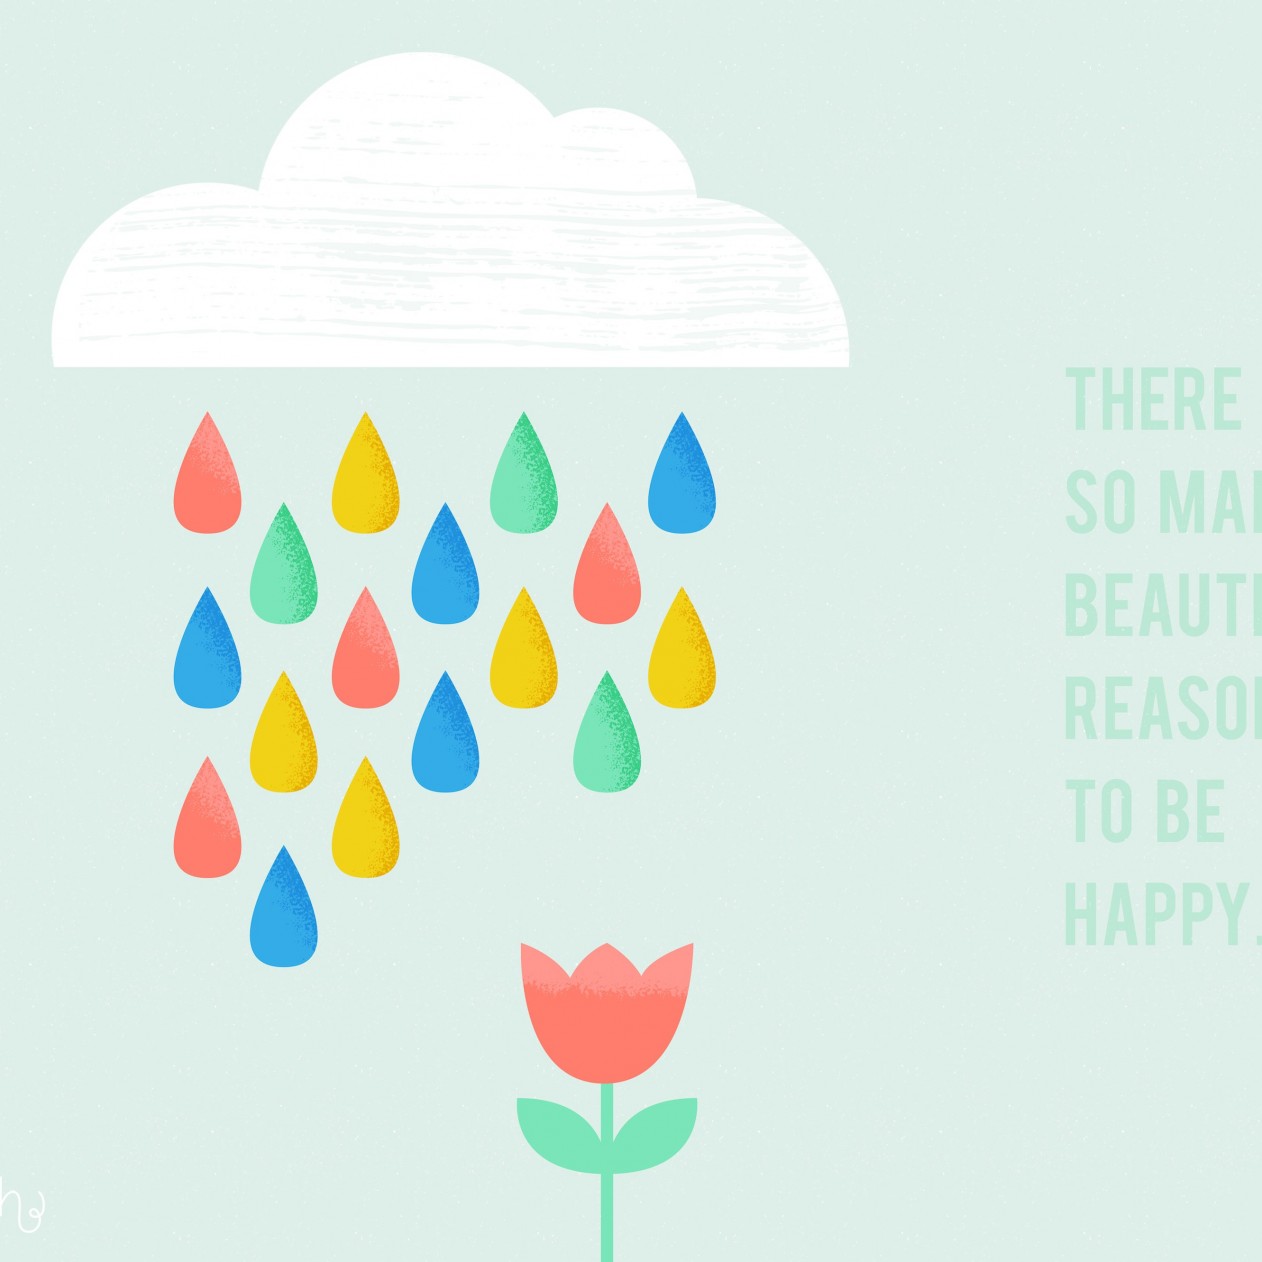 There are so many reasons to be happy Wallpaper for Apple iPad mini